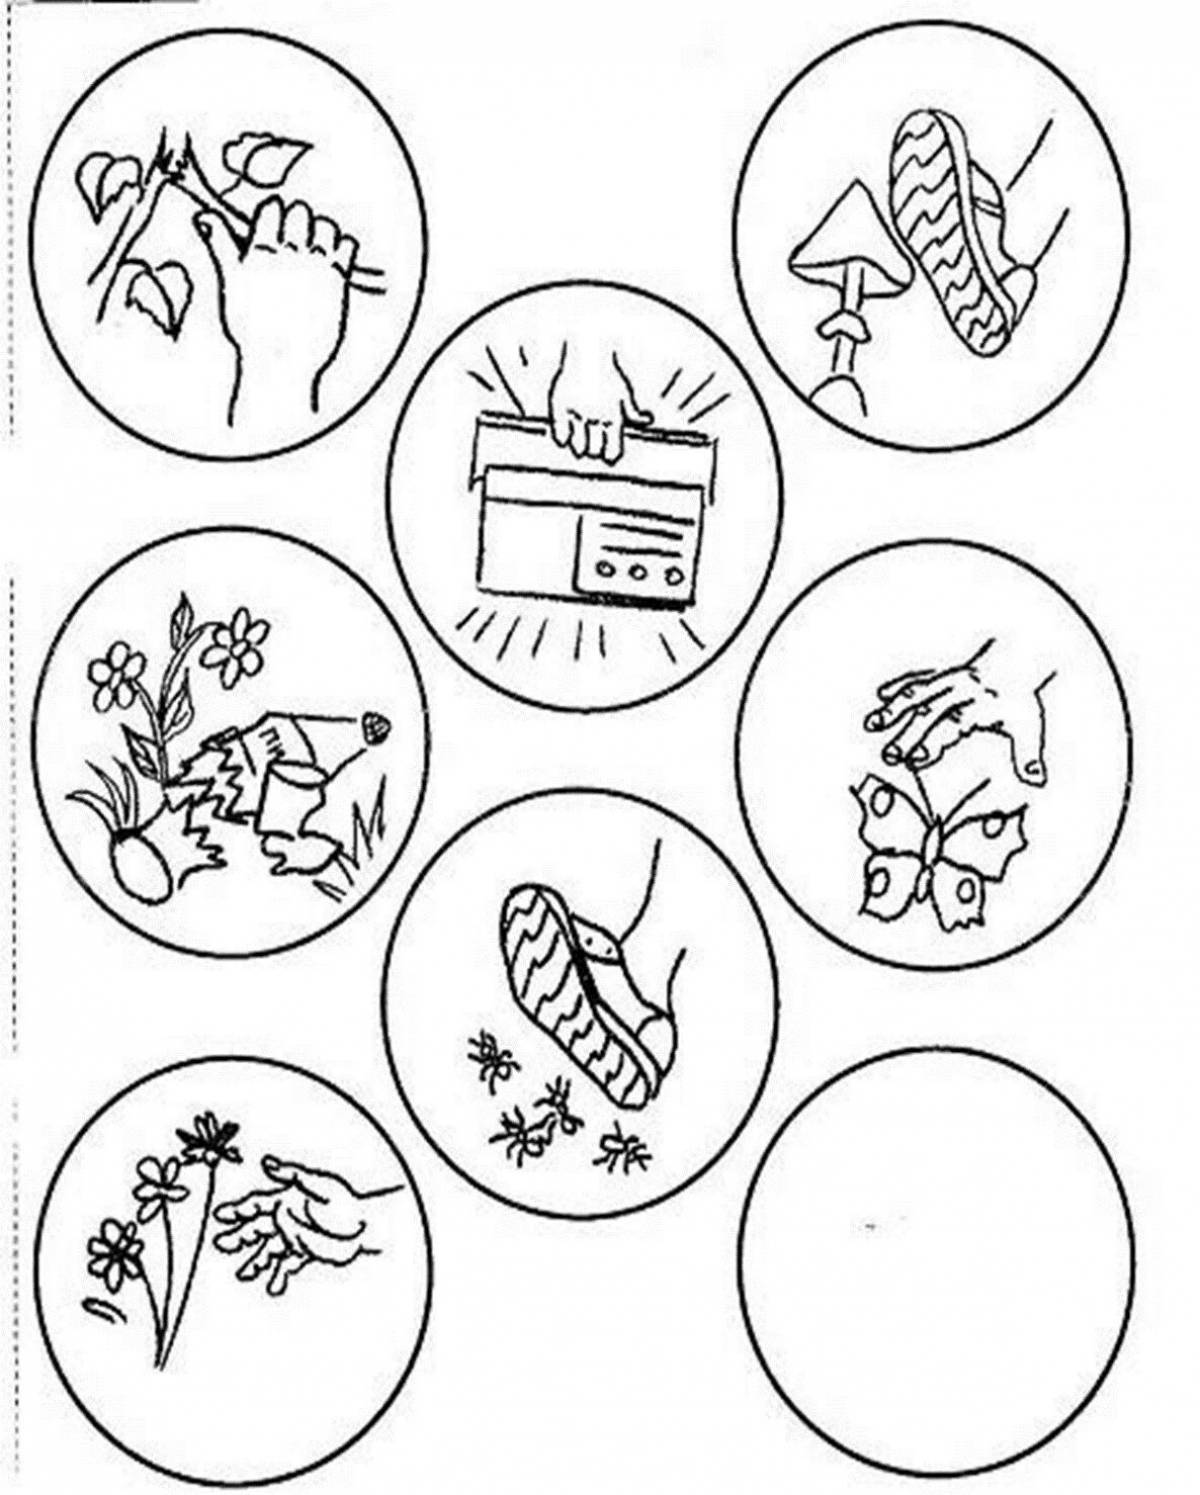 For children rules of conduct in the forest for #9